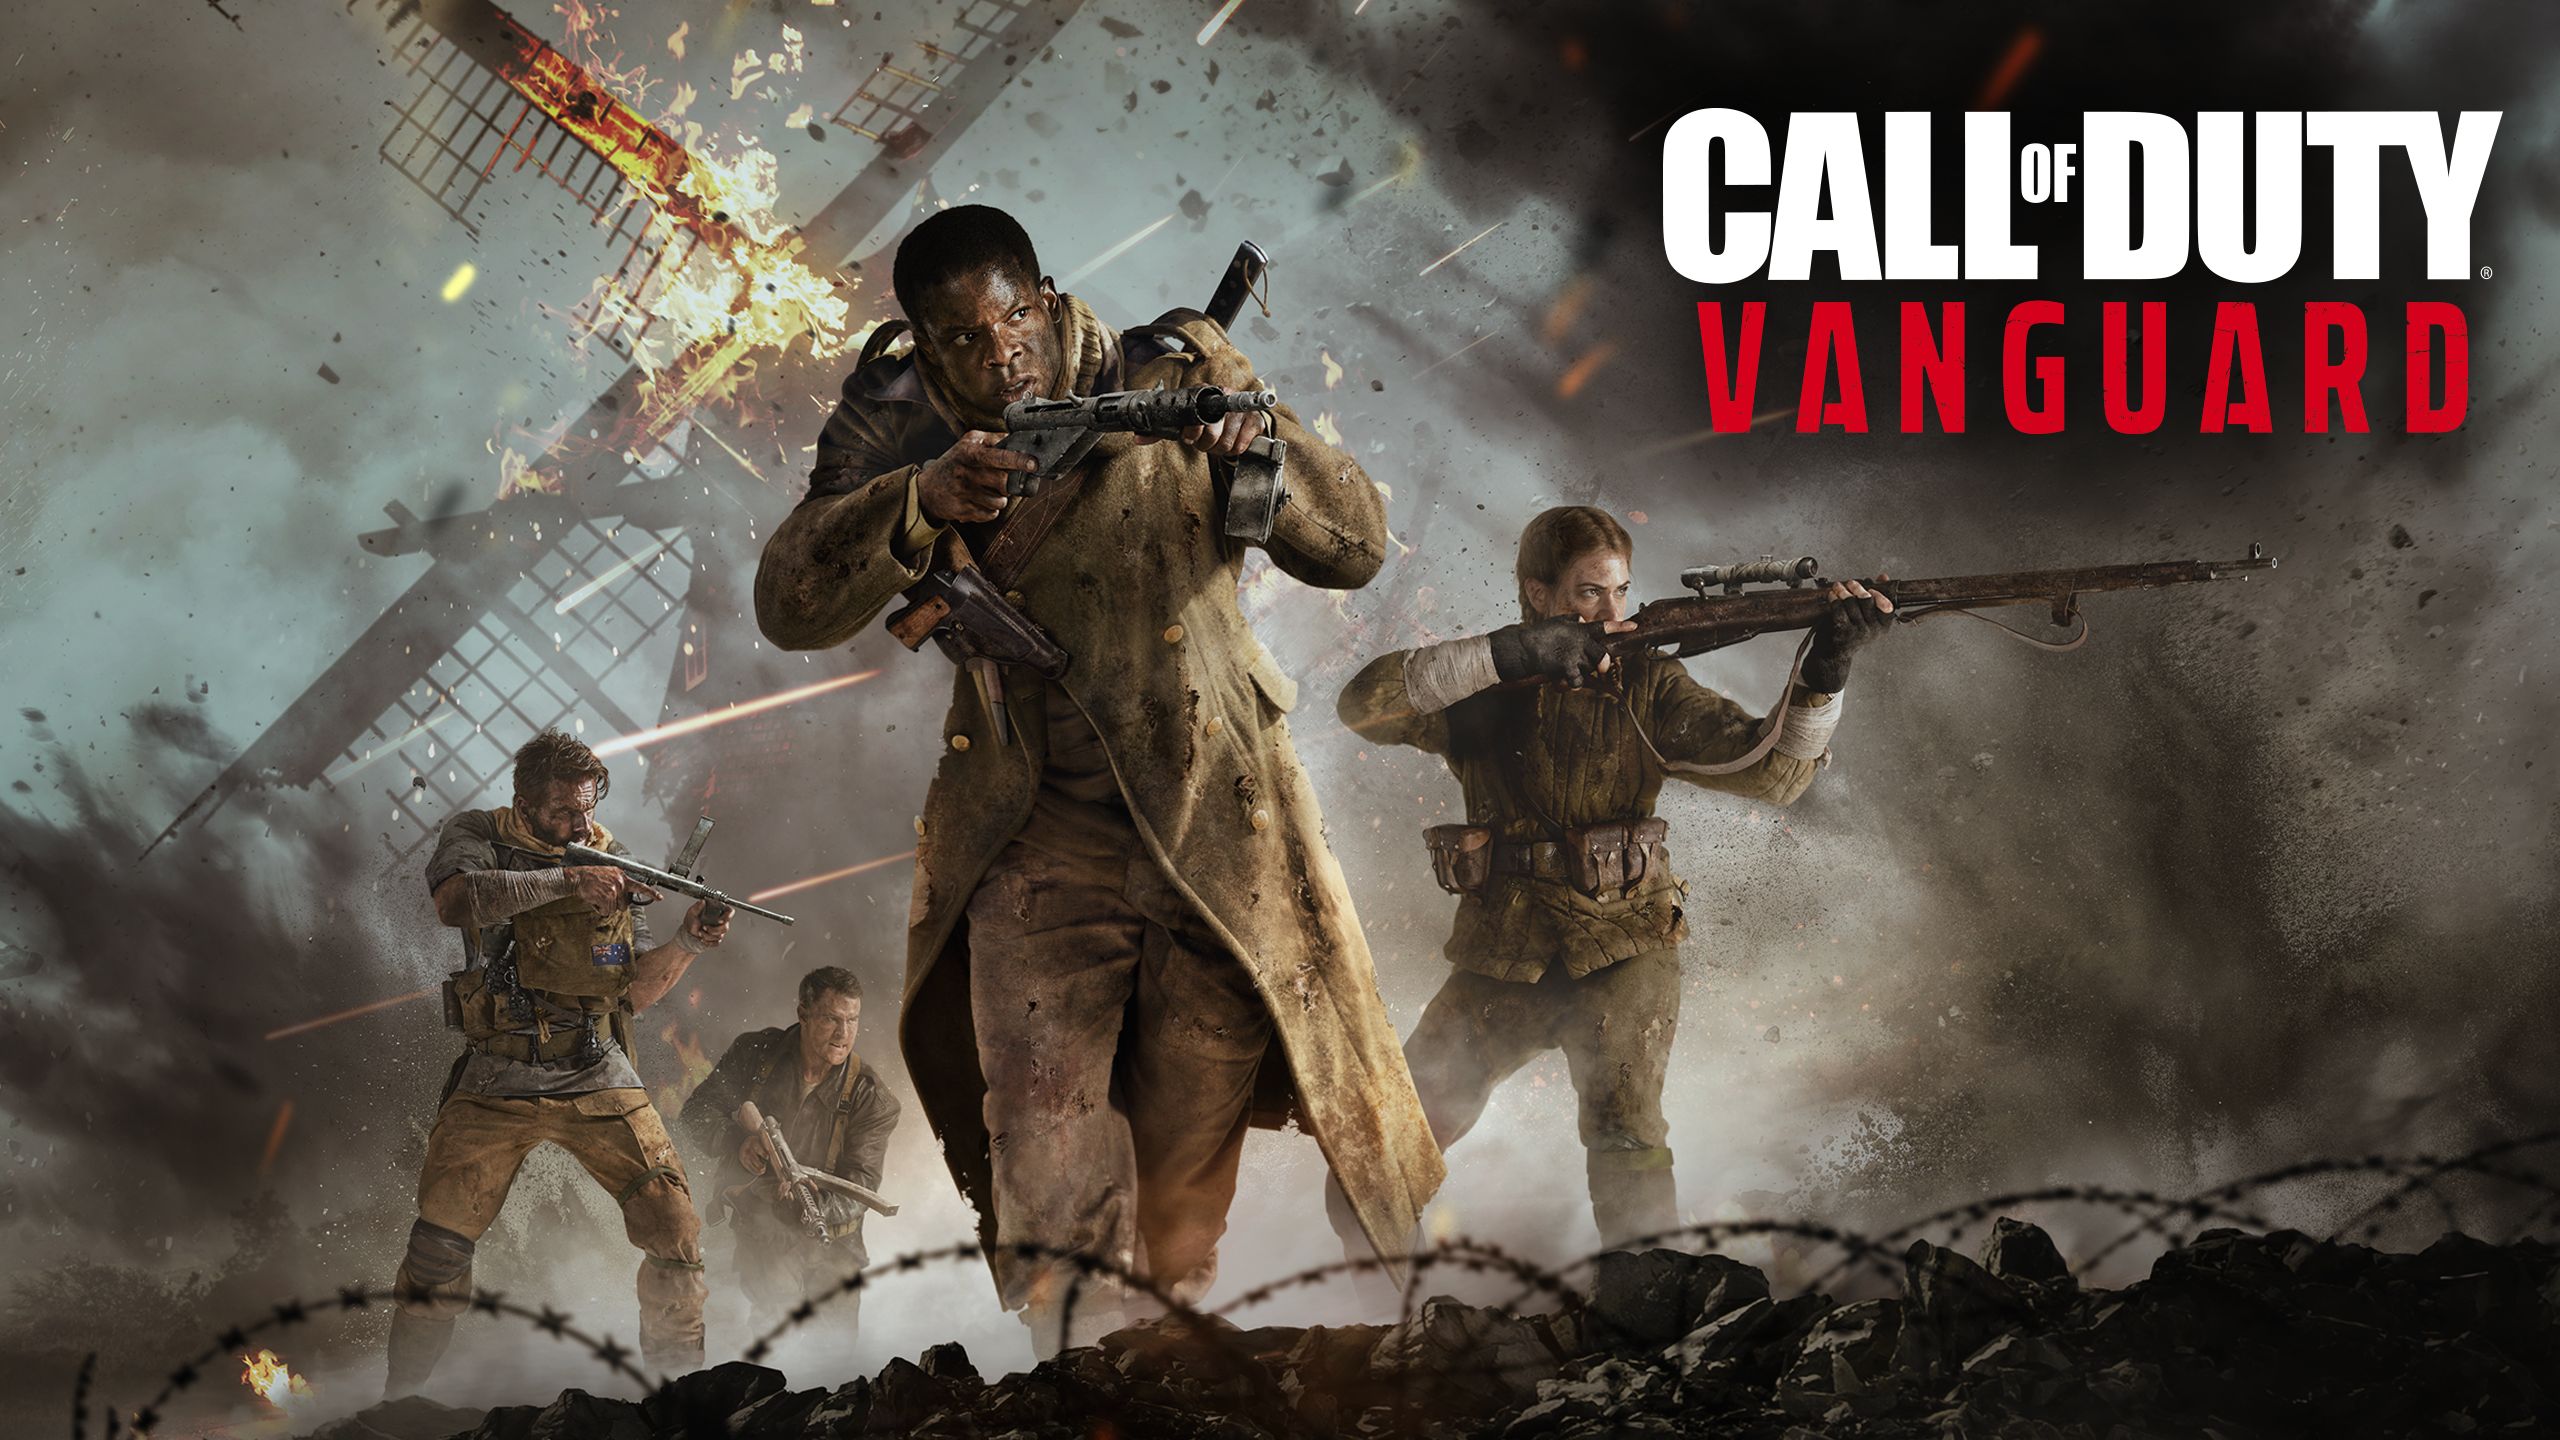 Call of duty new. Call of Duty Авангард. Call of Duty Vanguard 2. Call of Duty Vanguard картинки. Call of Duty: WWII Vanguard.